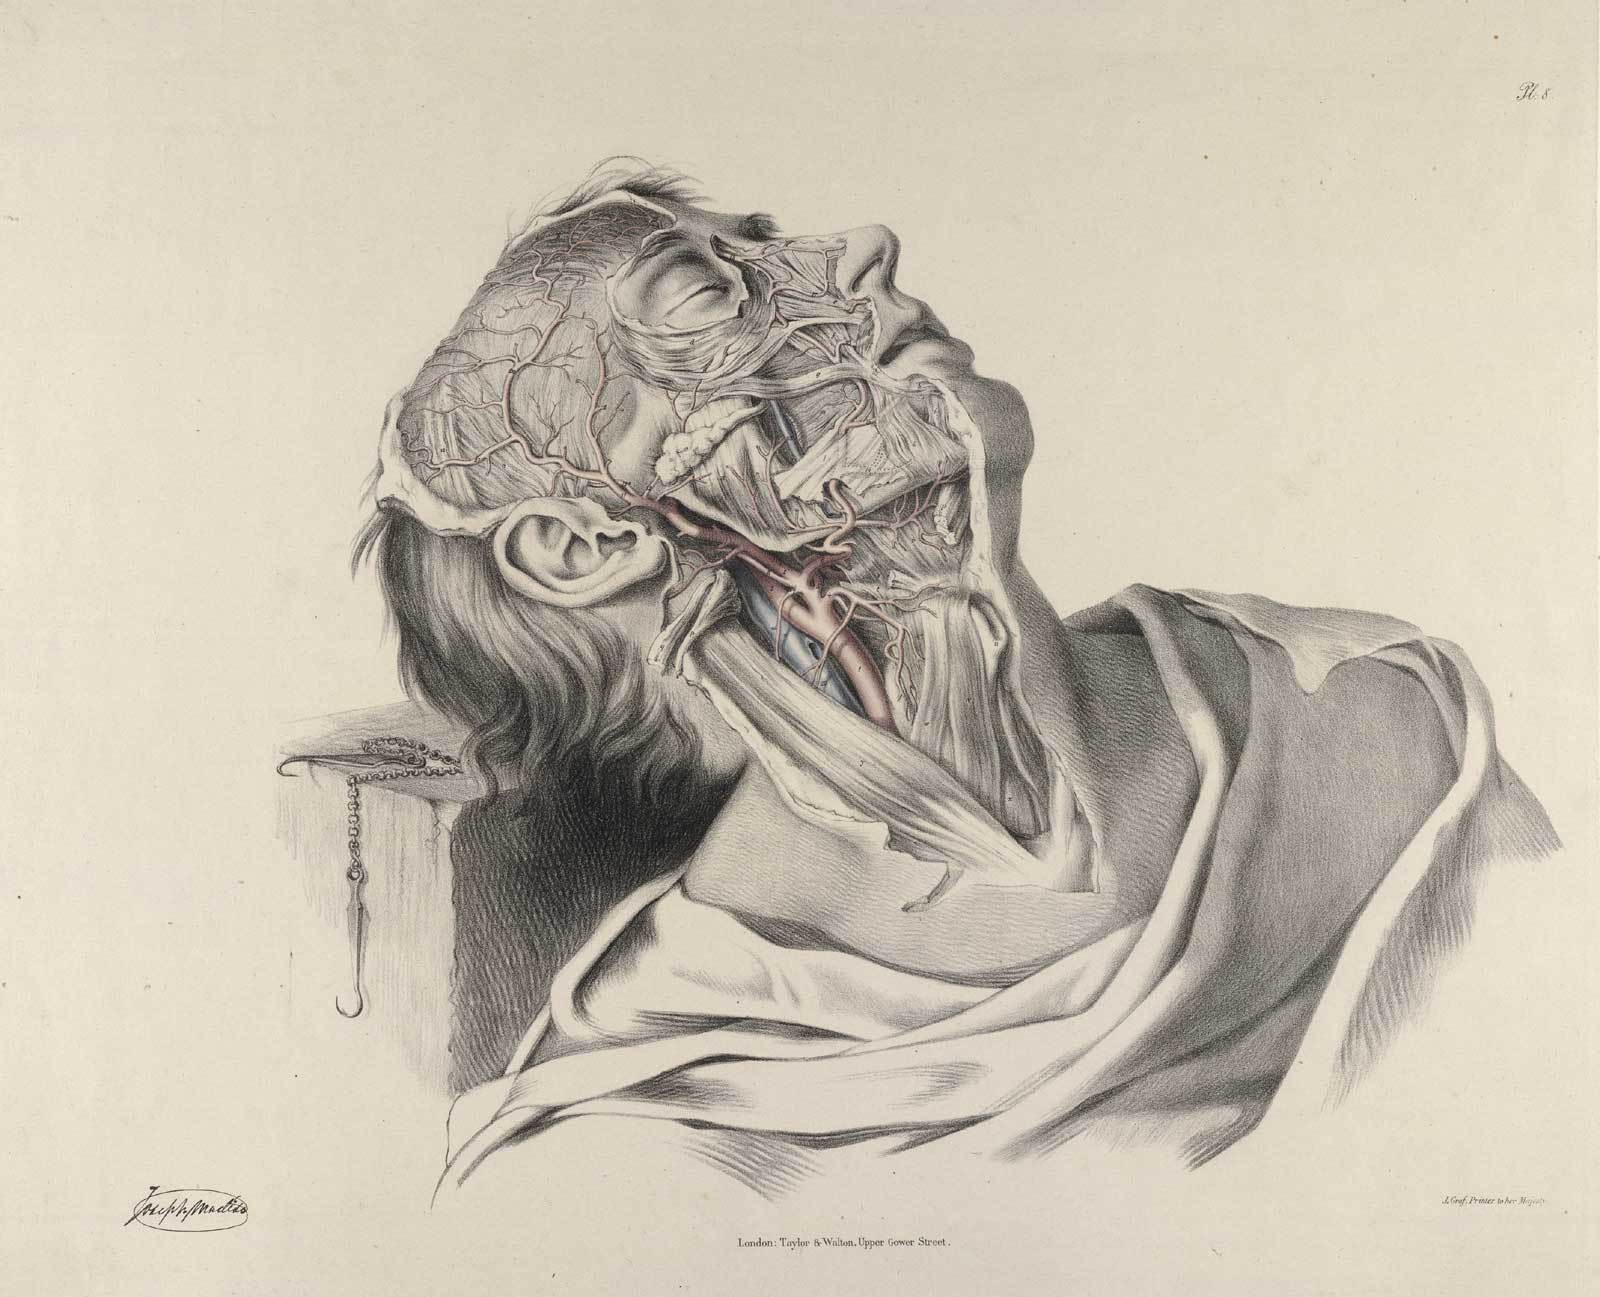 Plate 8 of Quain's The anatomy of the arteries of the human body, with its applications to pathology and operative surgery, featuring the right side view of the flayed body of a male corpse from the neck to the top of his head displaying the muscles, nerves and arteries of the neck.